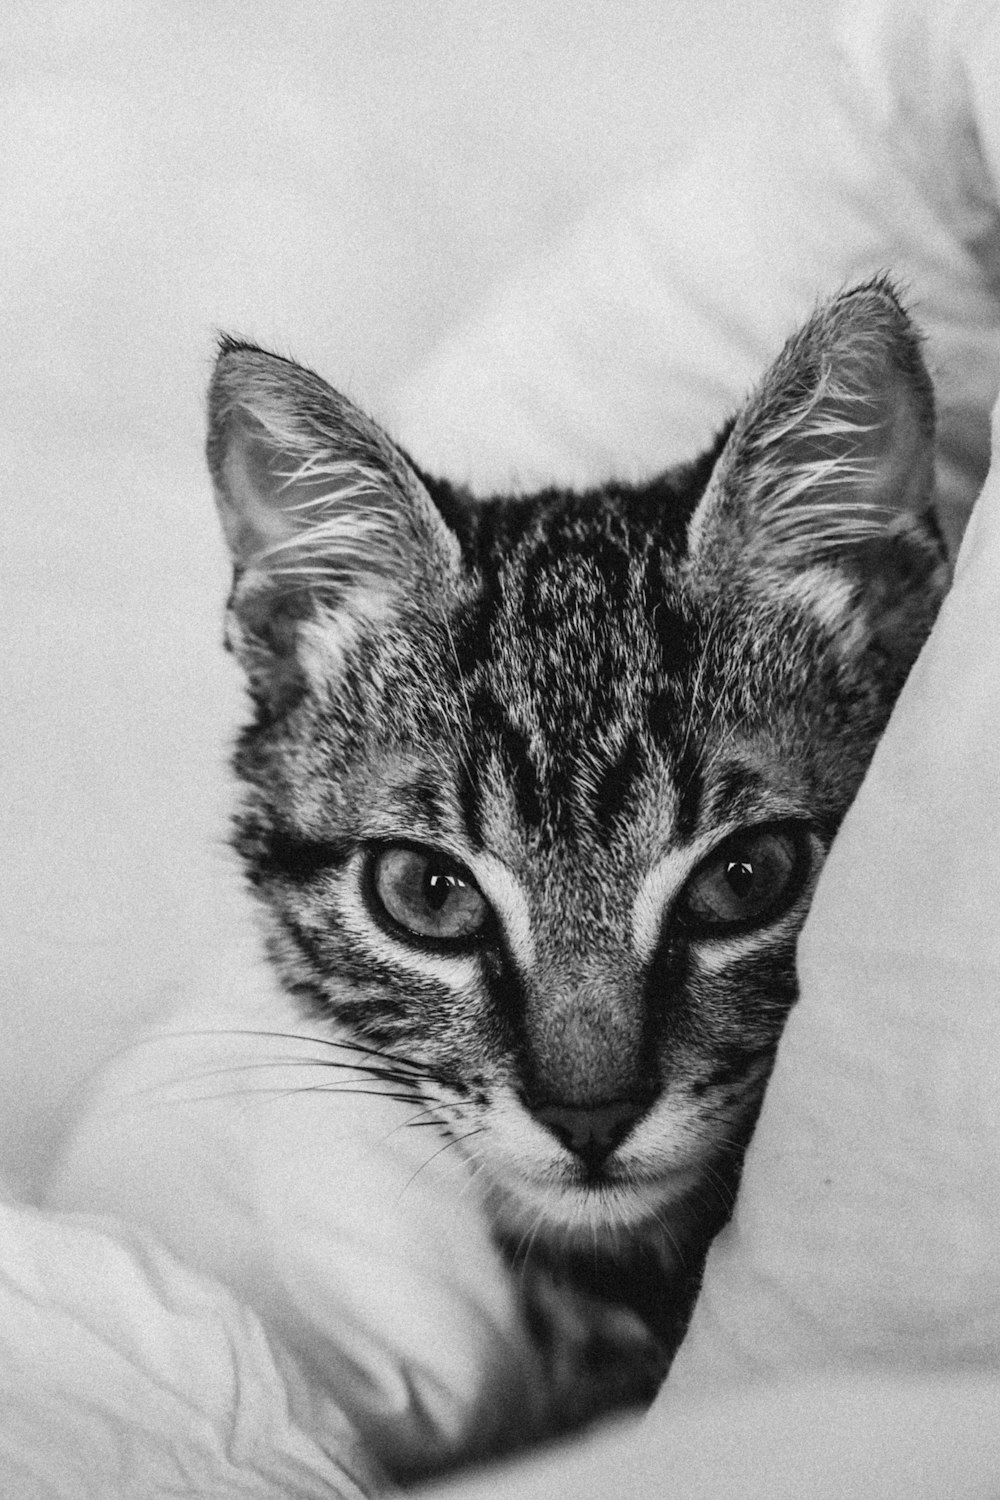 a black and white photo of a kitten peeking out from under a blanket